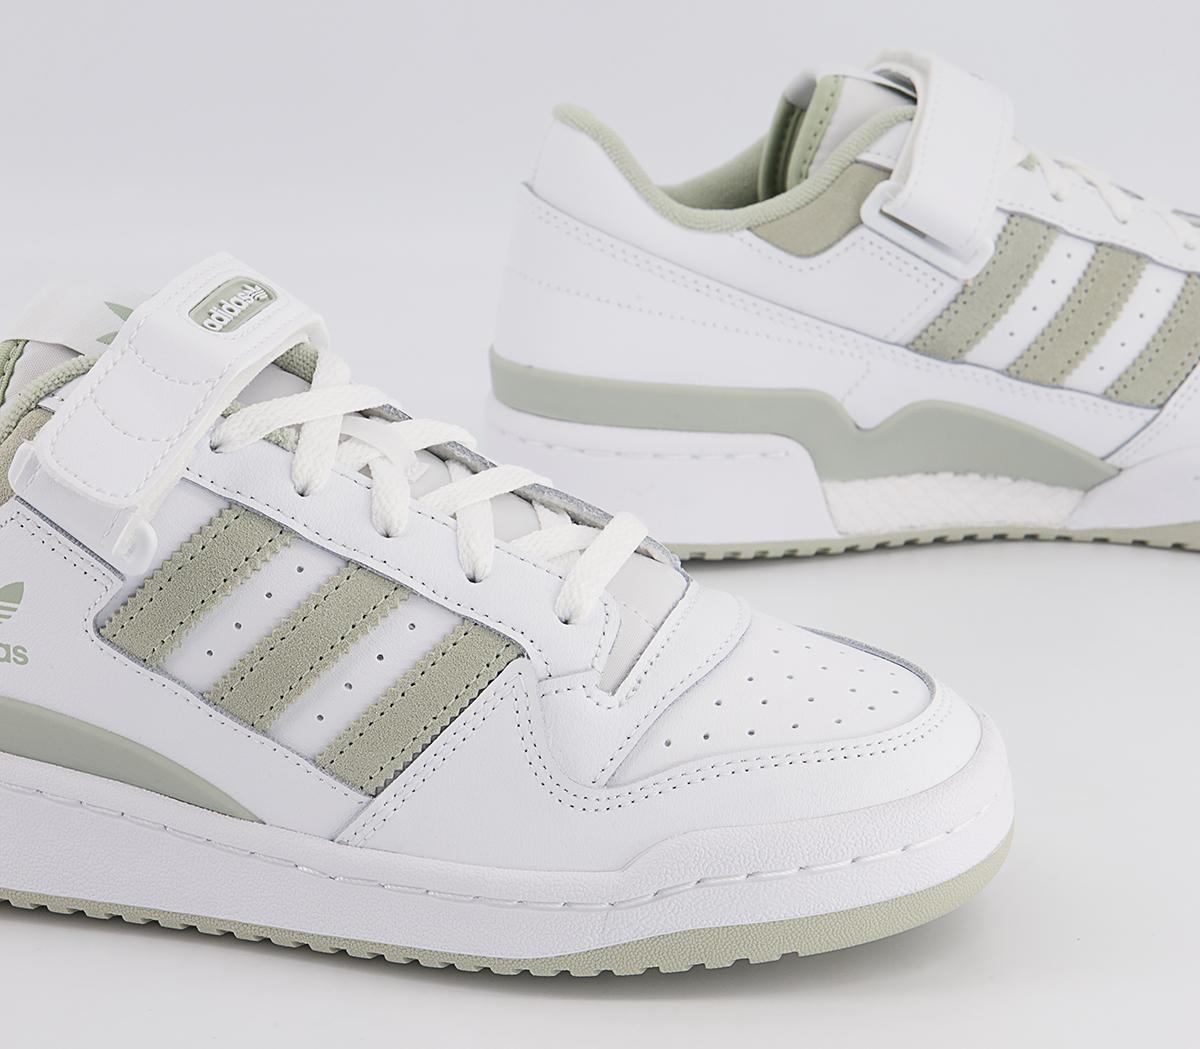 adidas Forum Low Trainers White Halo Green White - Hers trainers